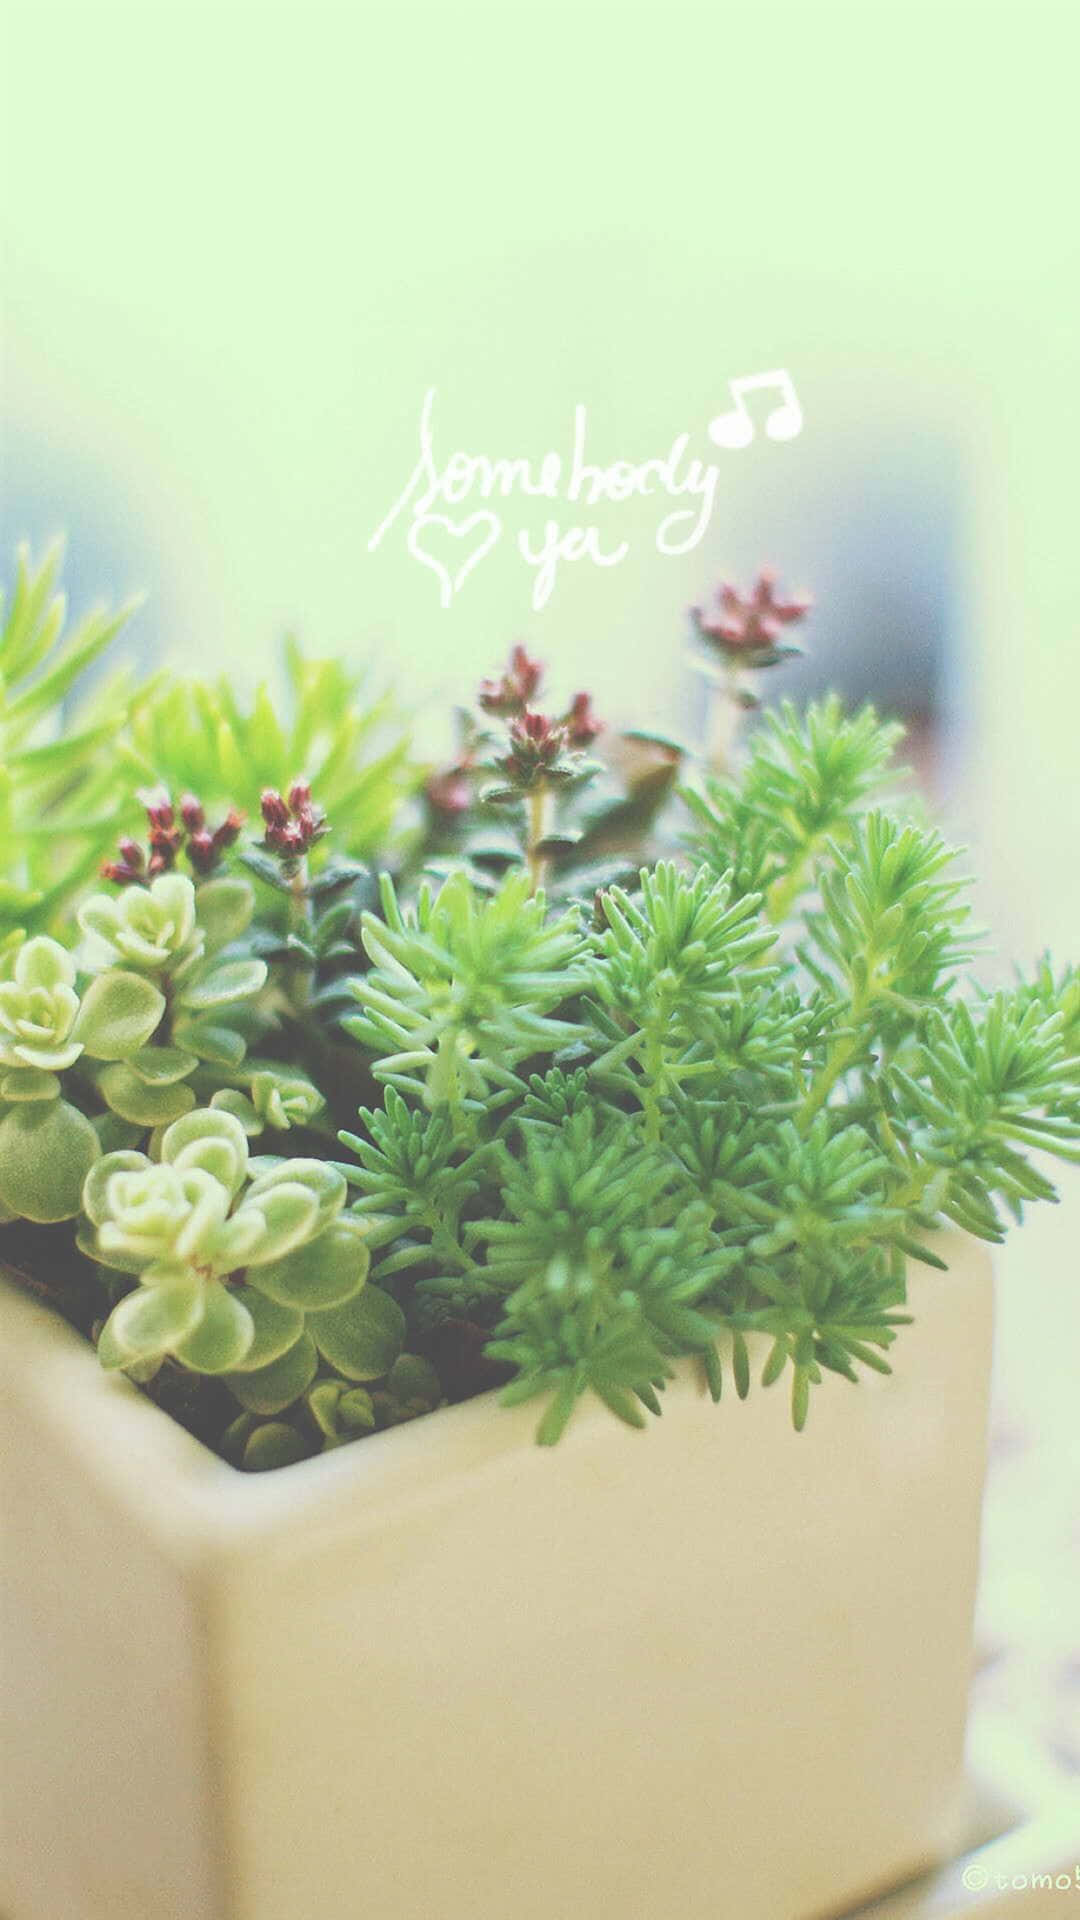 Aesthetic Green Plant On A Pot Wallpaper